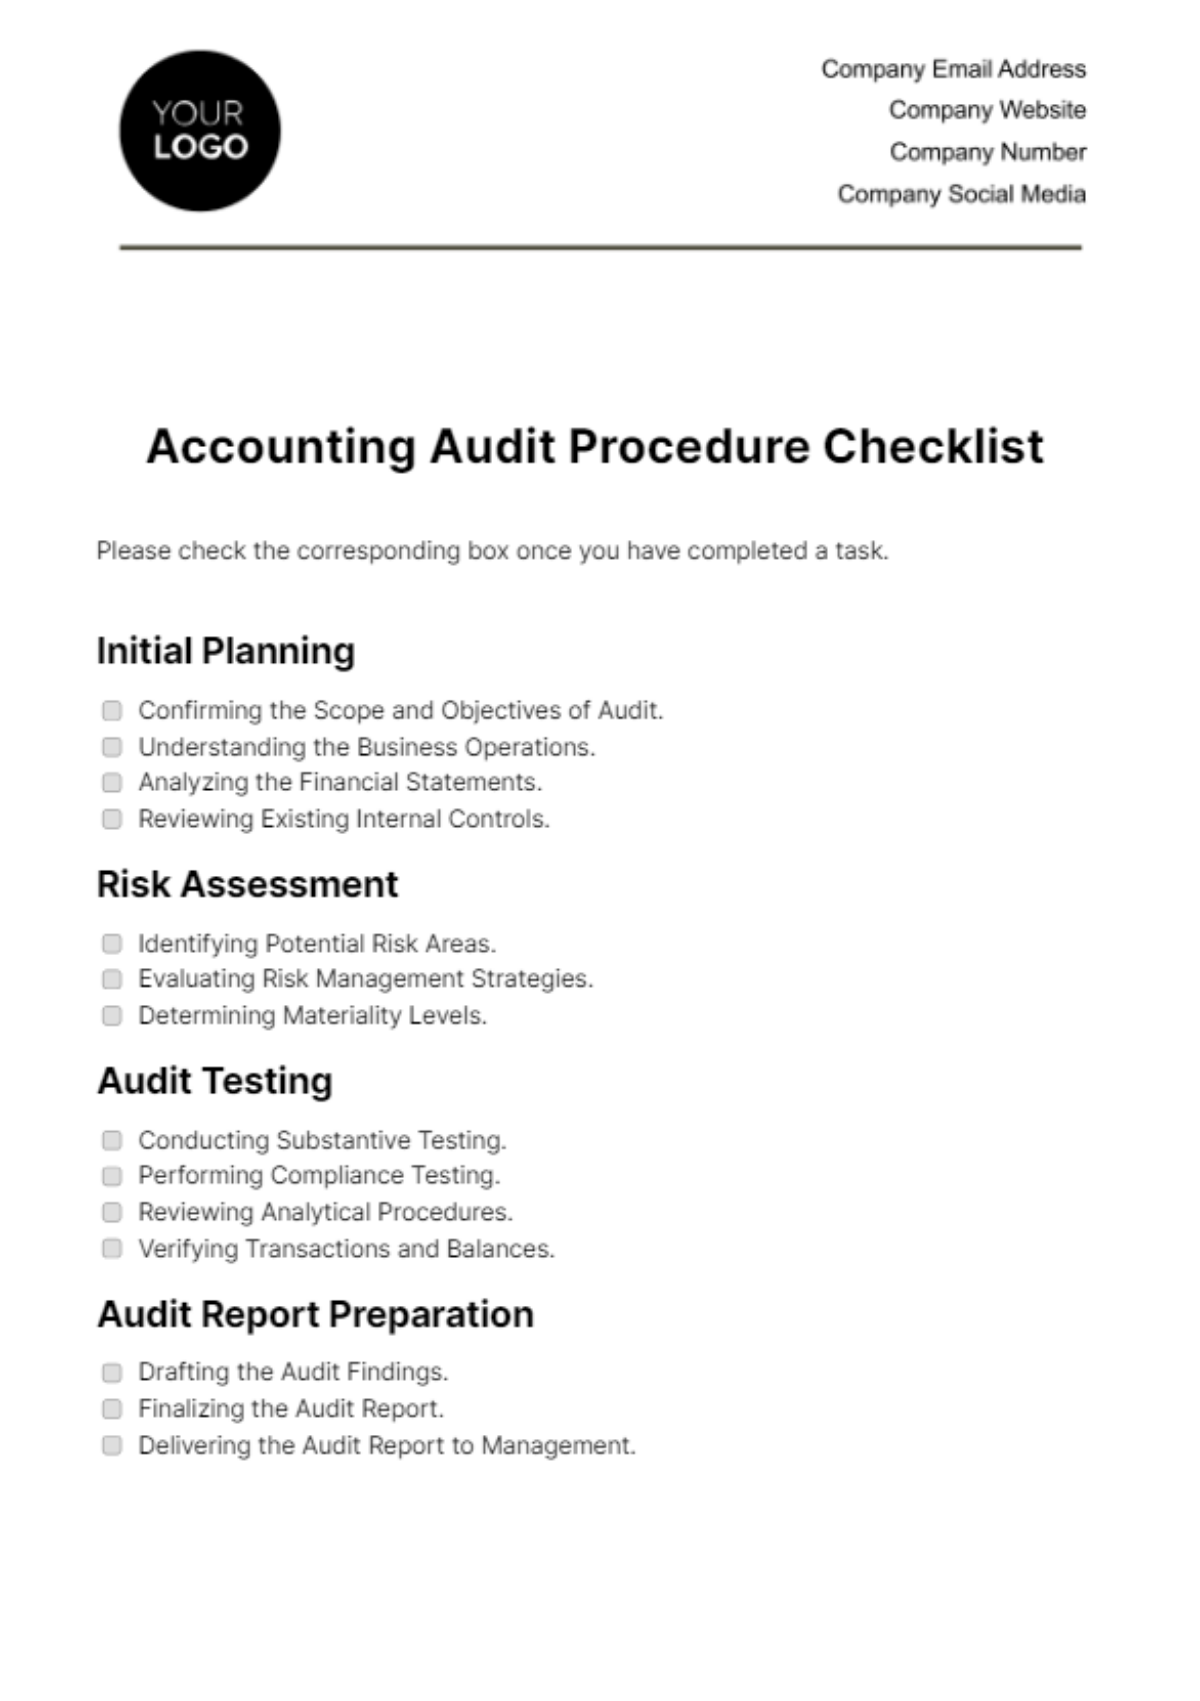 Free Accounting Audit Procedure Checklist Template